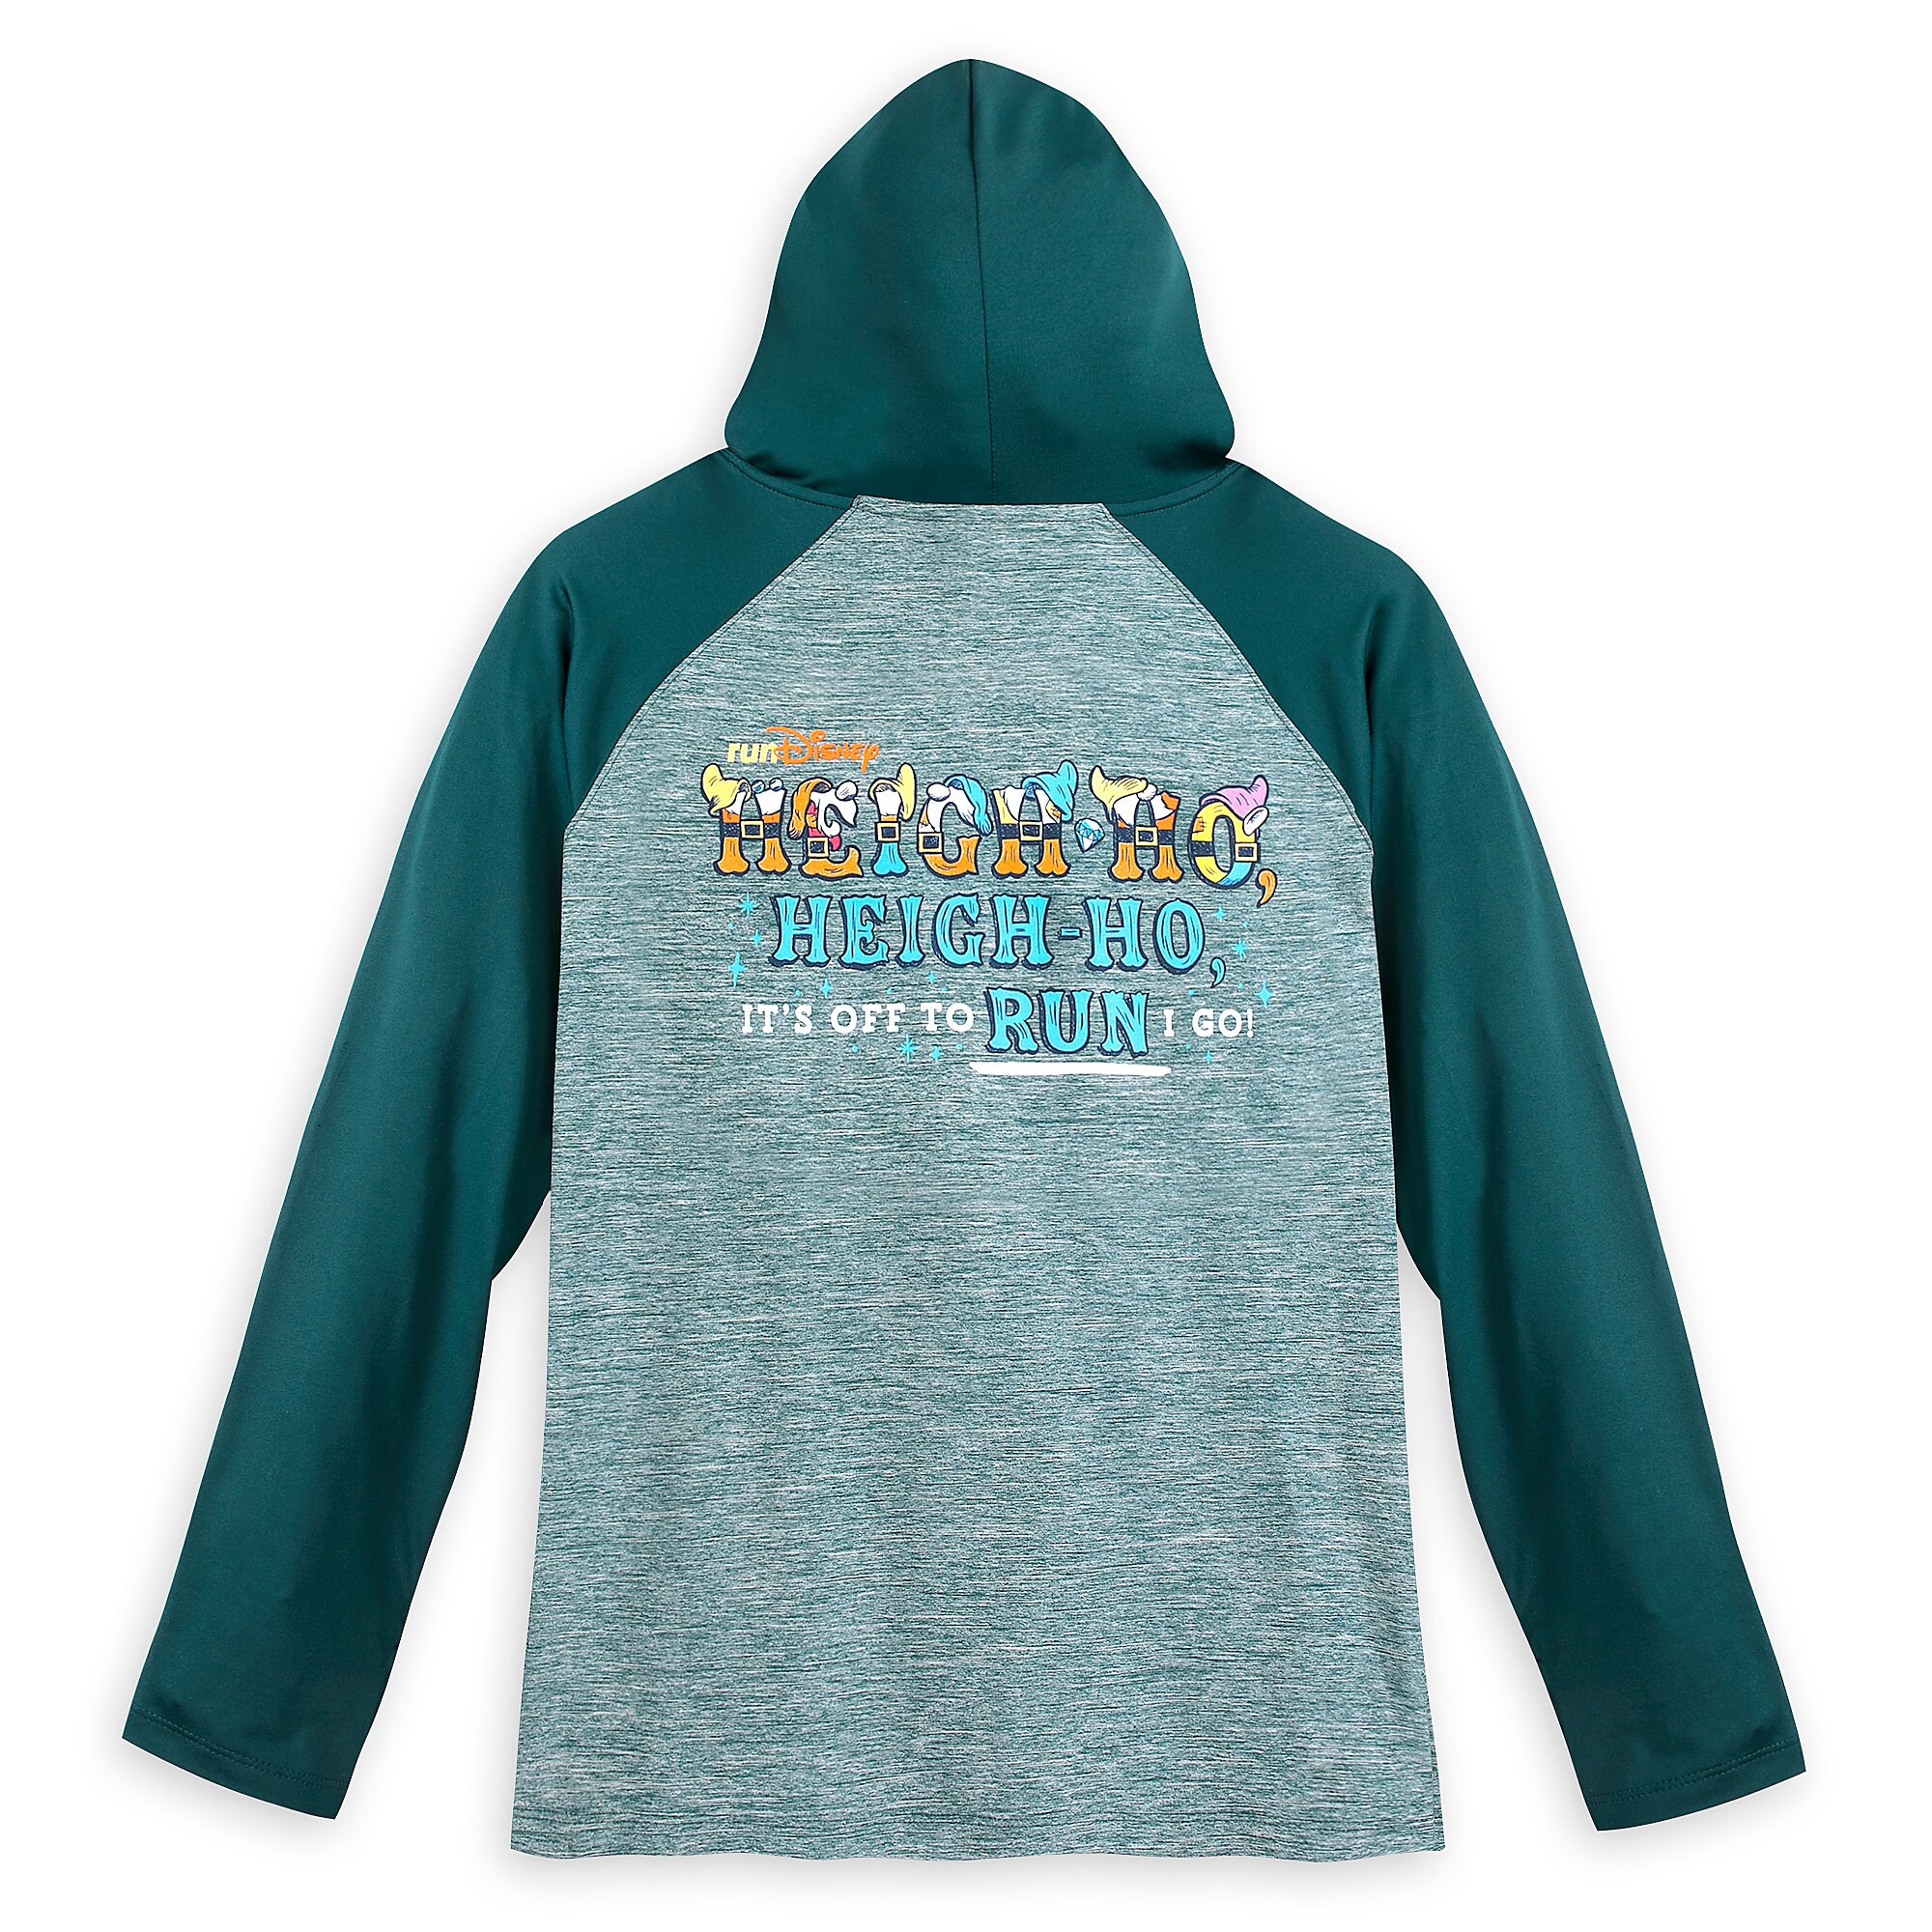 runDisney Heigh-Ho Long Sleeve Hooded Performance Top for Adults